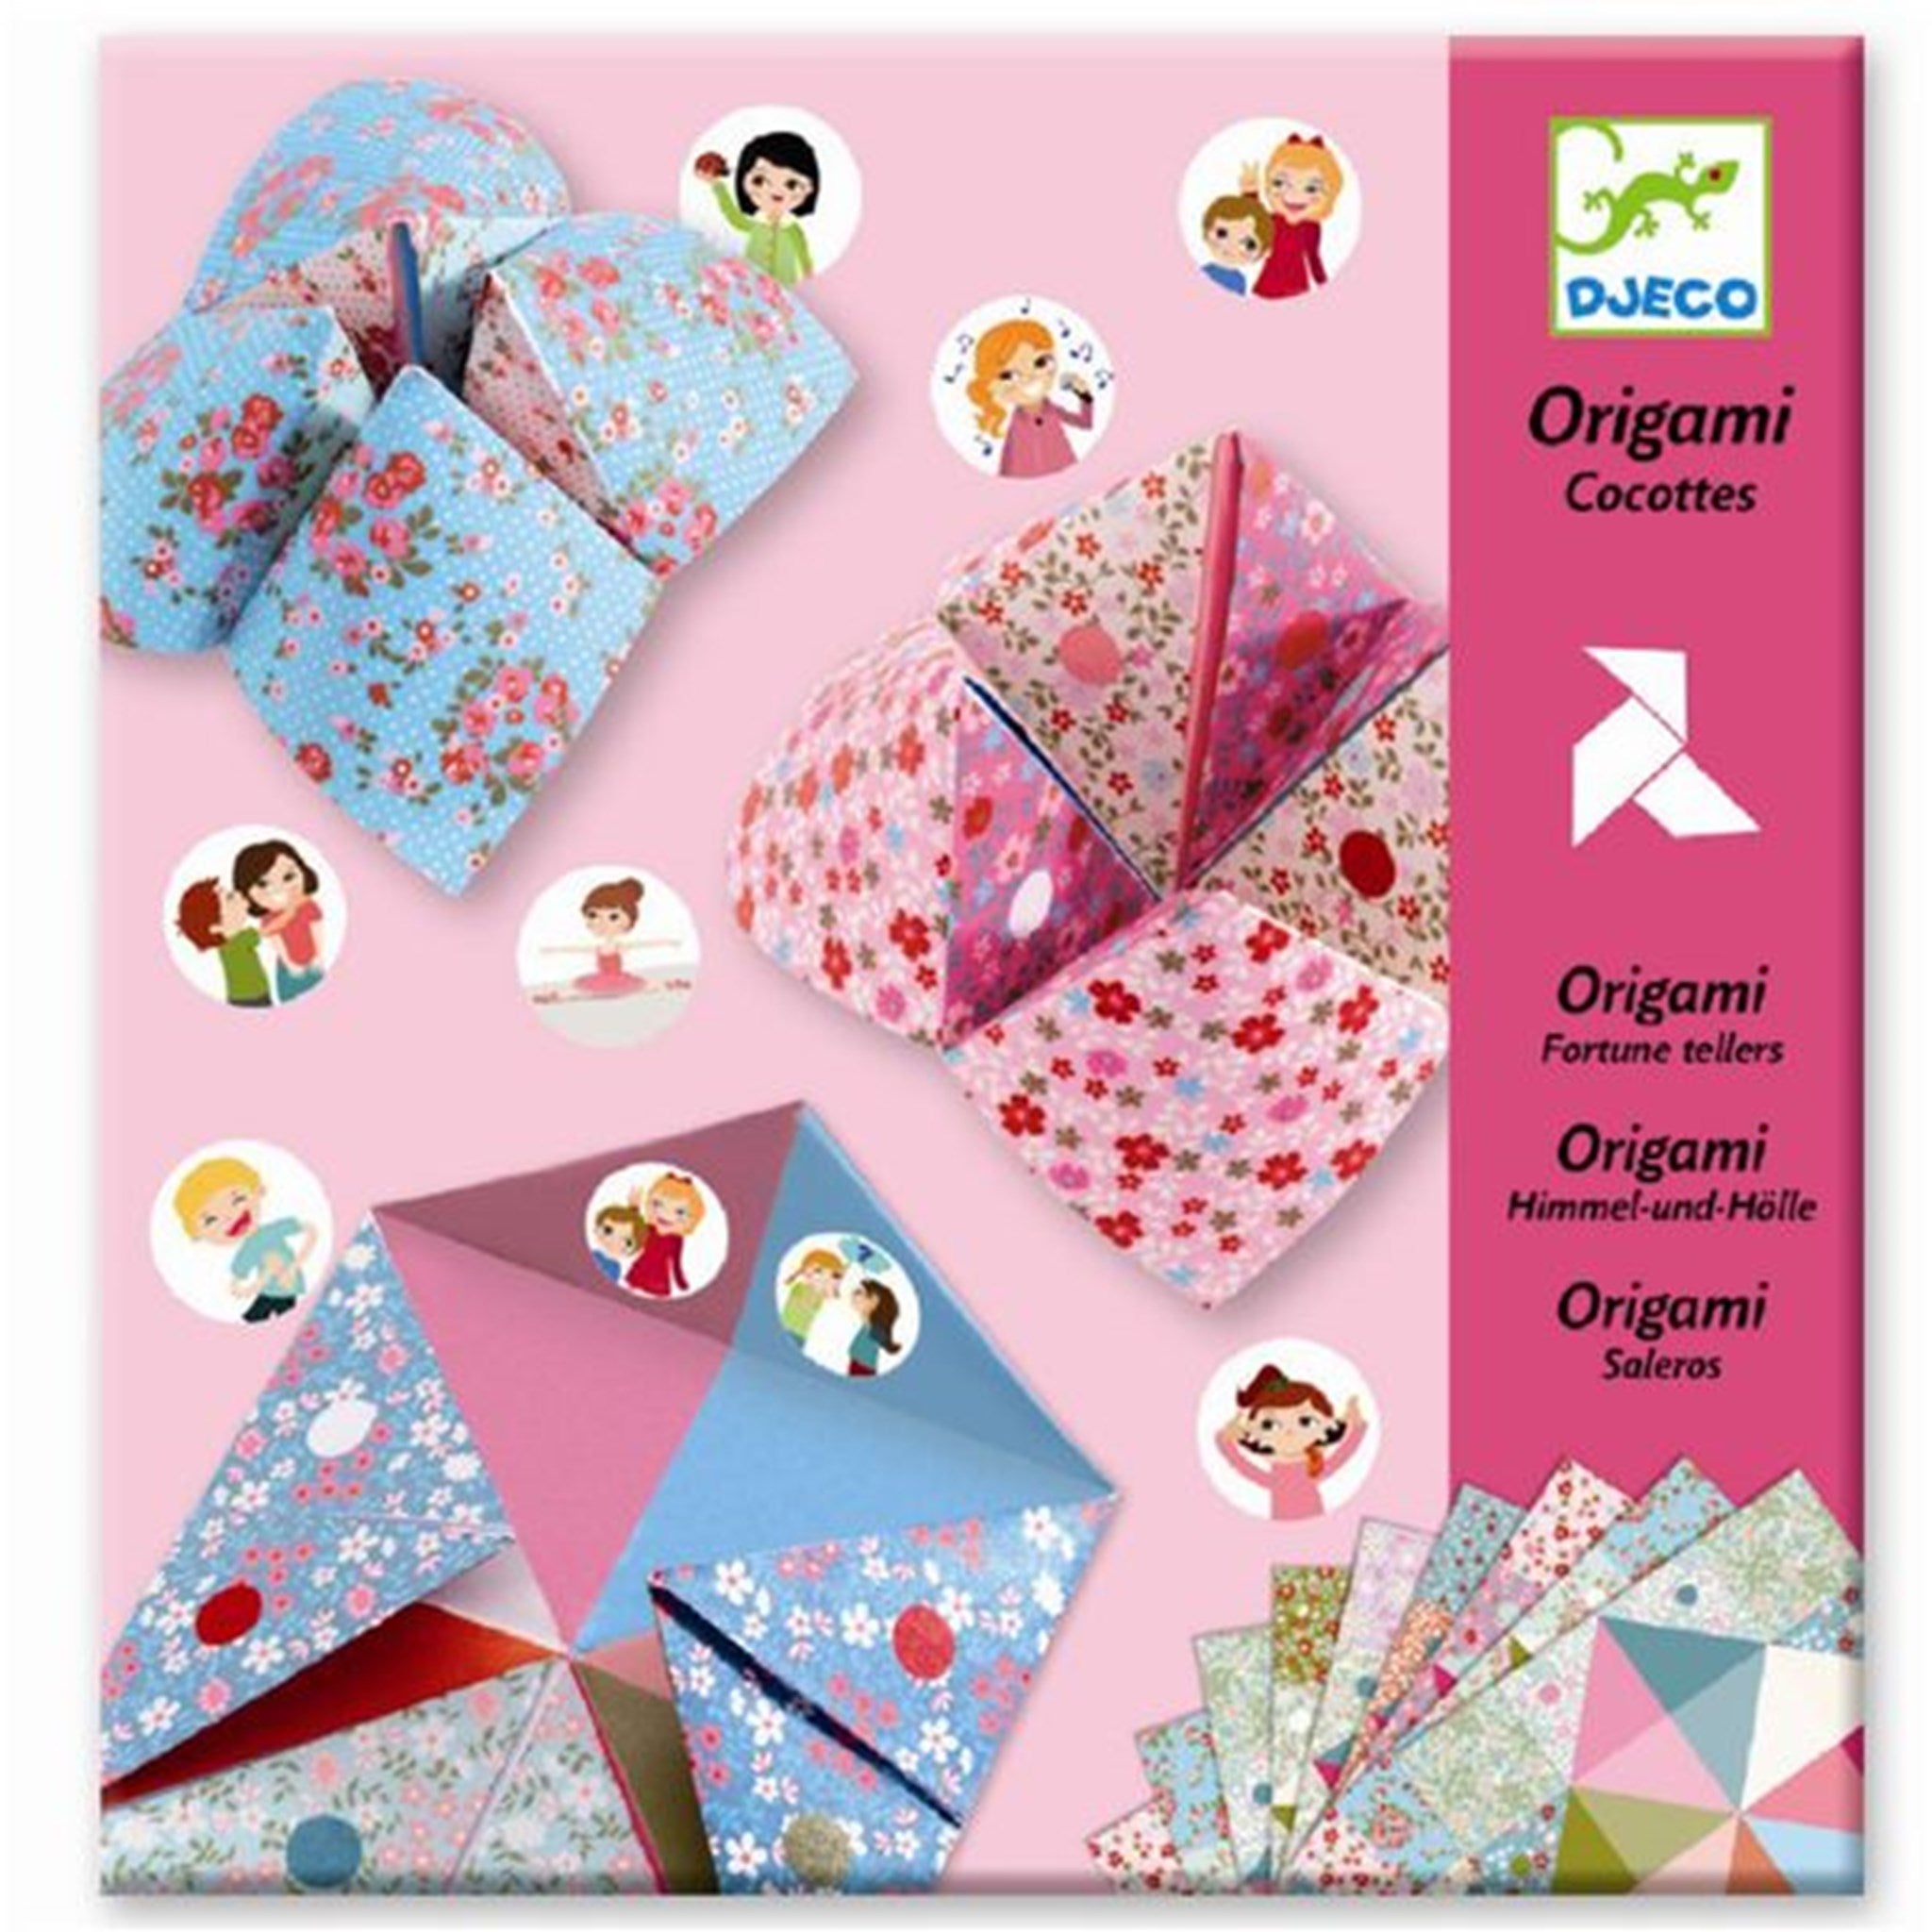 Djeco Origami Flap-Flappere Blomster